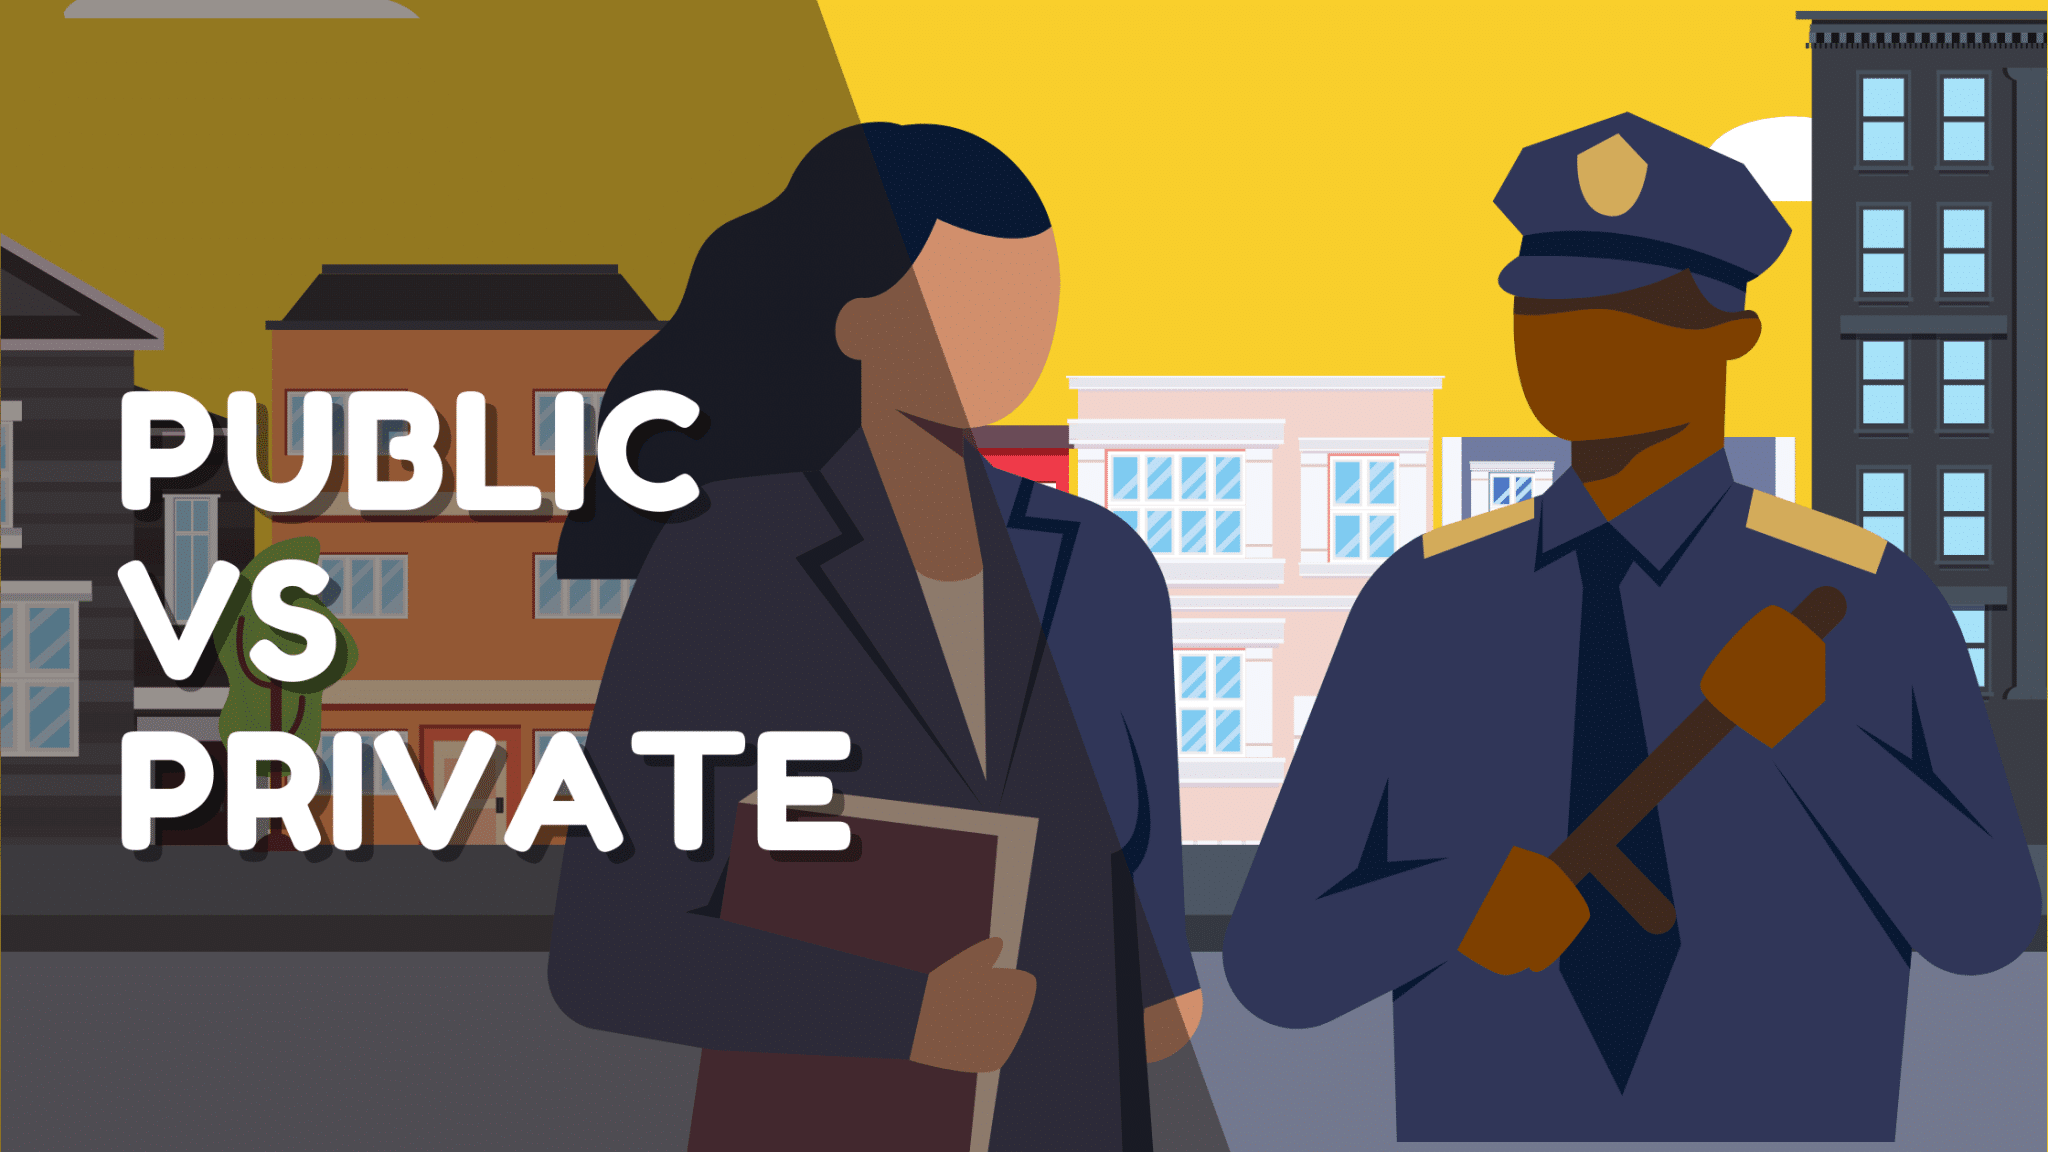 Public vs private policing with a focus on inclusive employment.